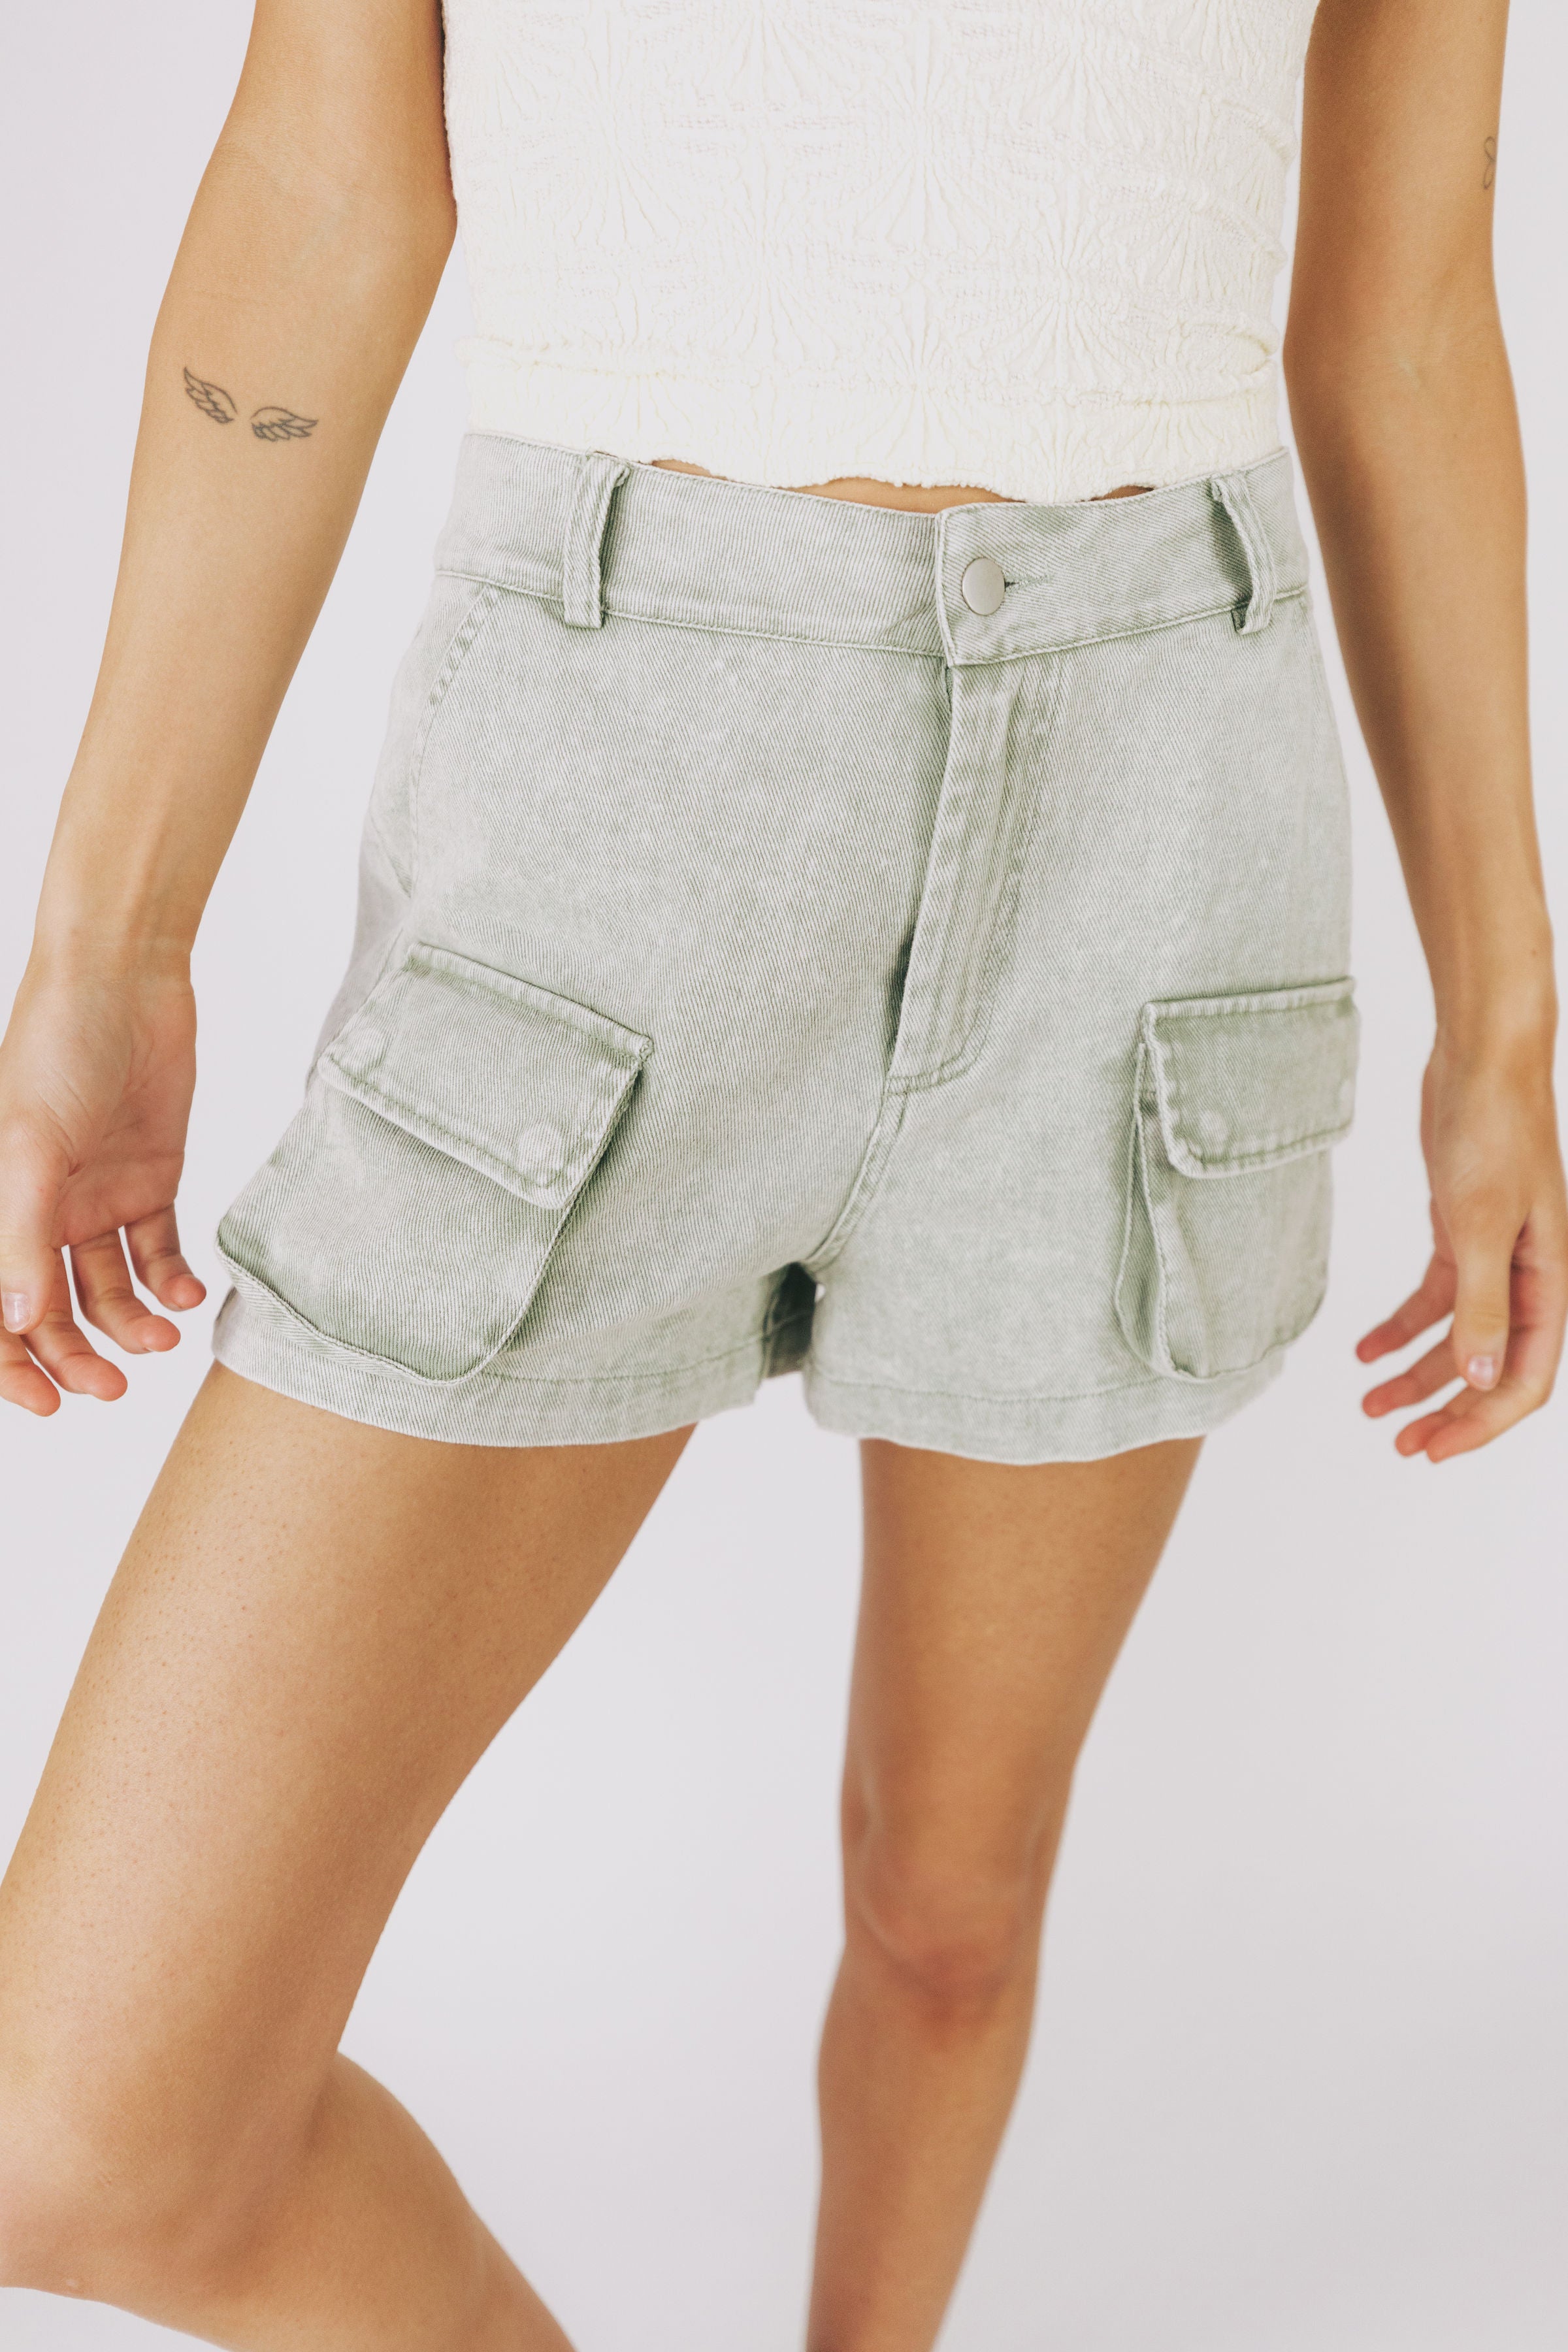 Top Of The World Shorts